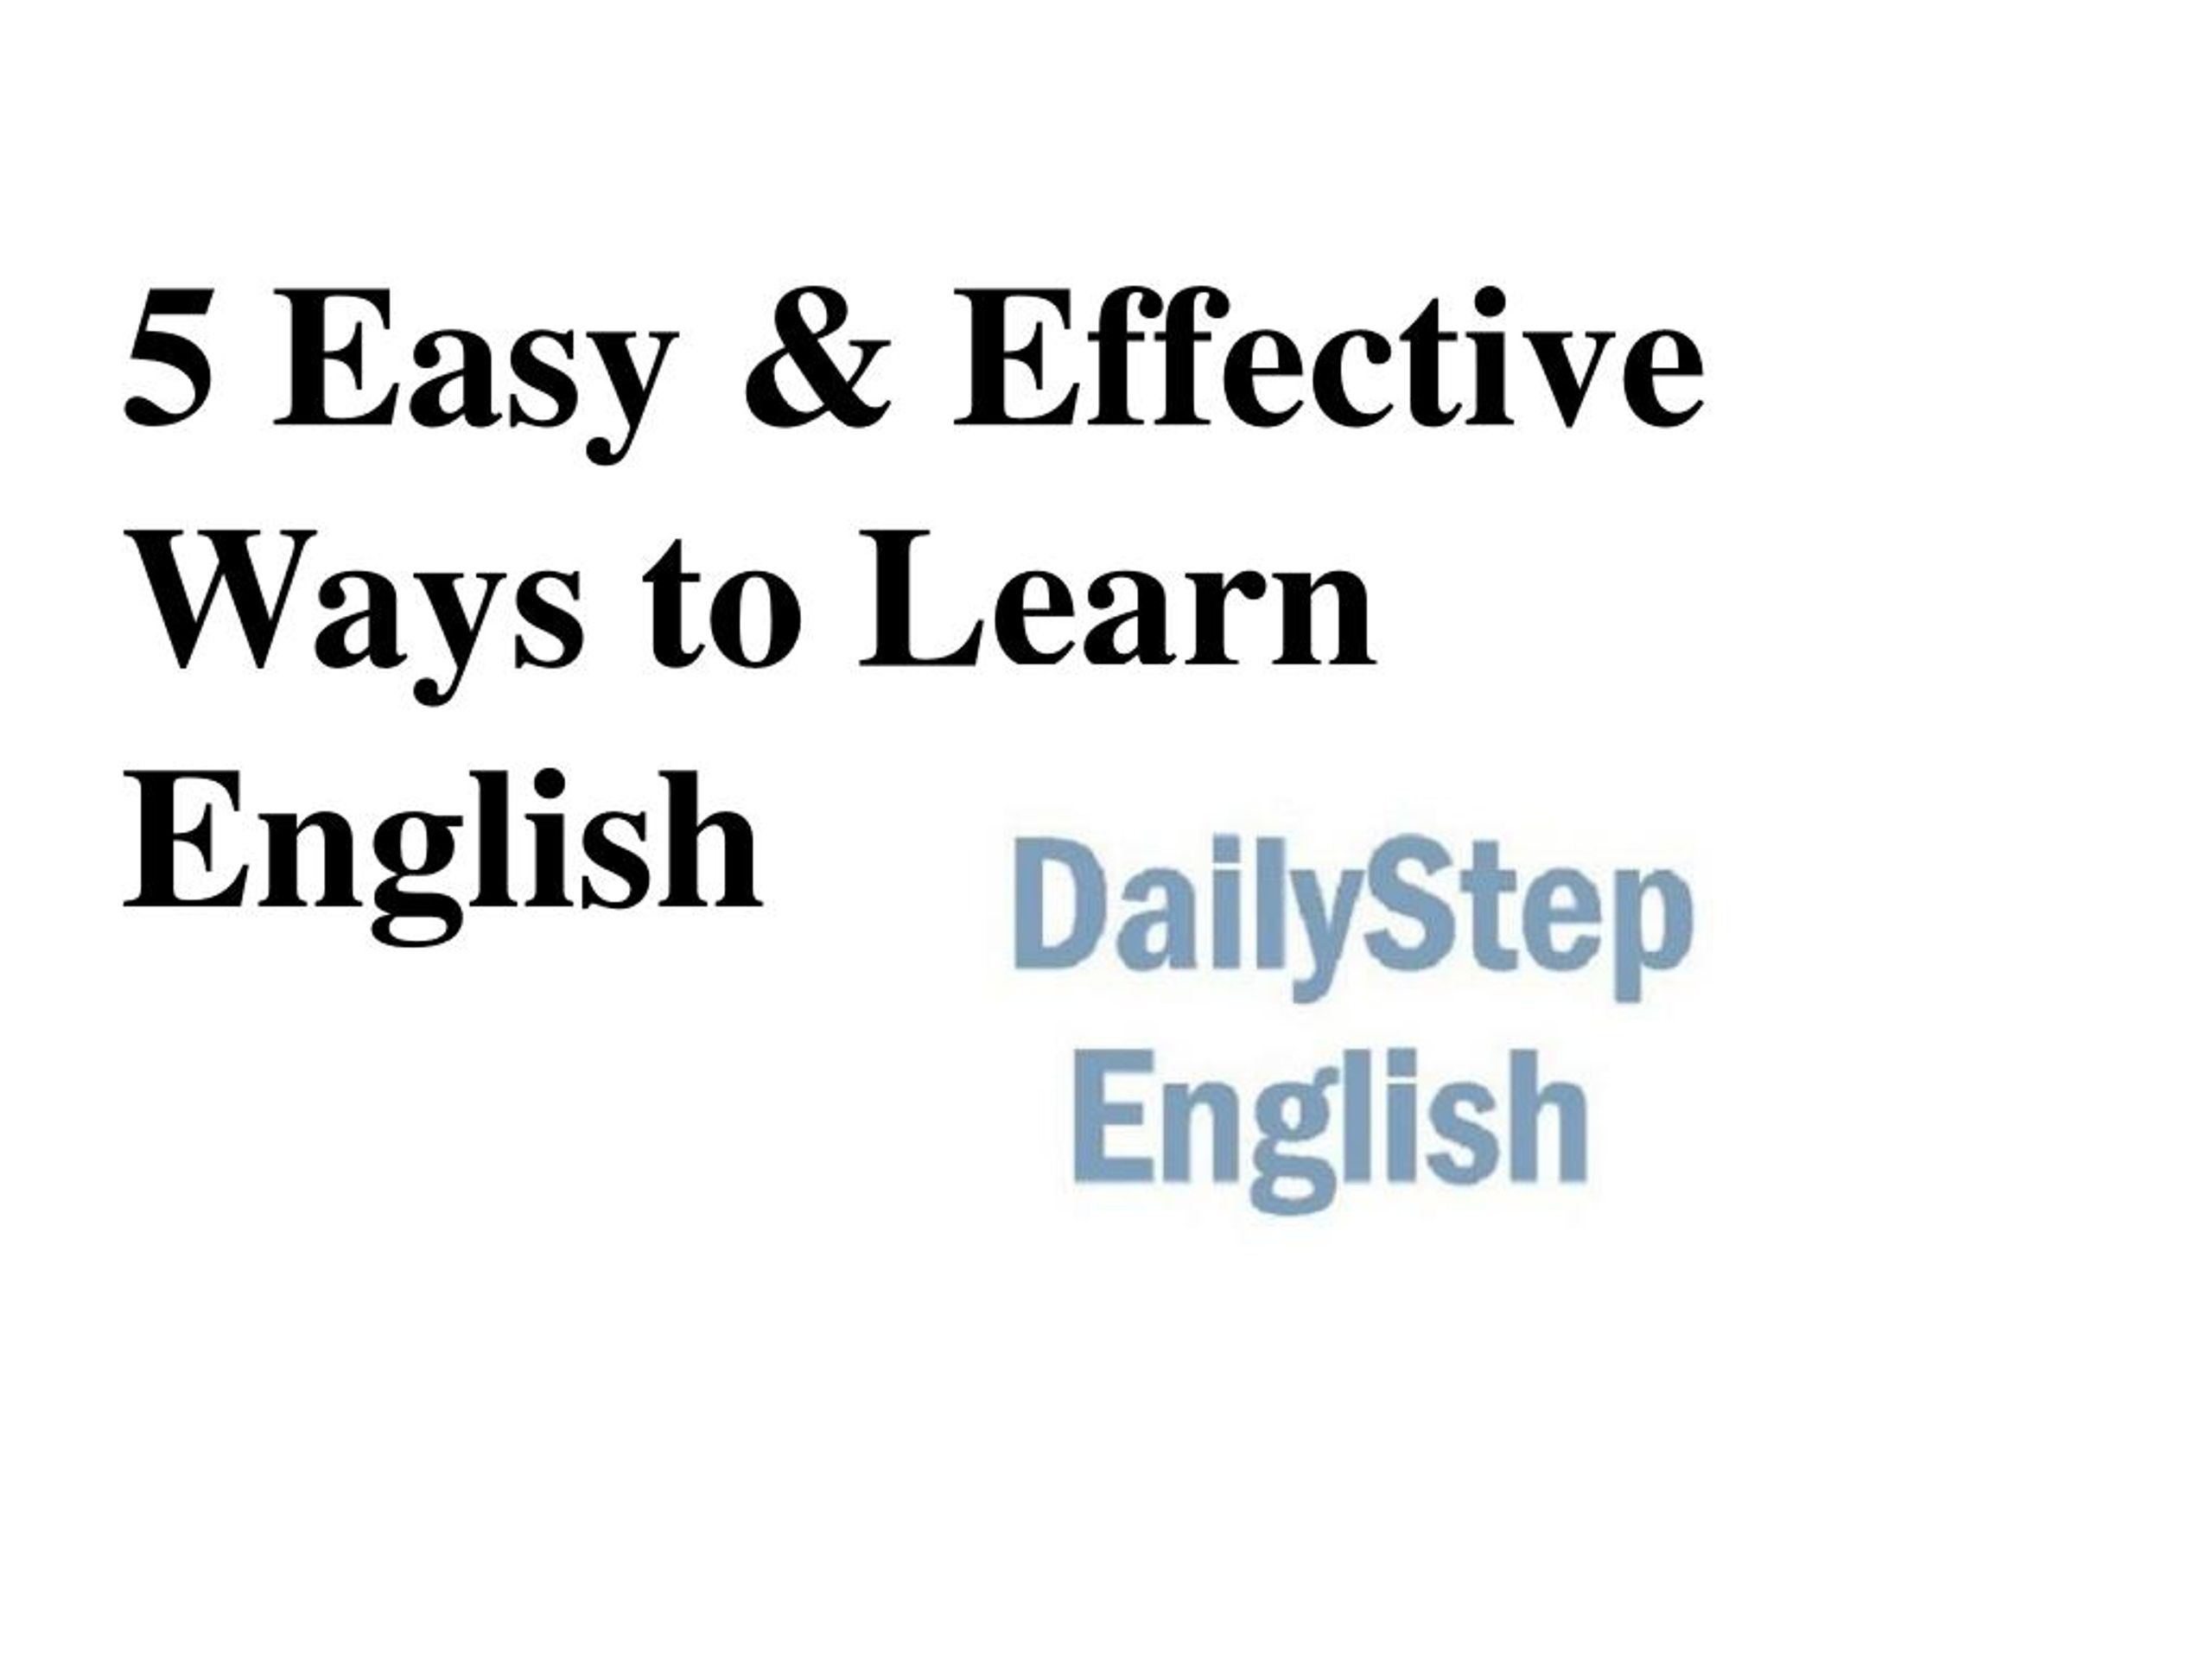 how to learn english in easy way